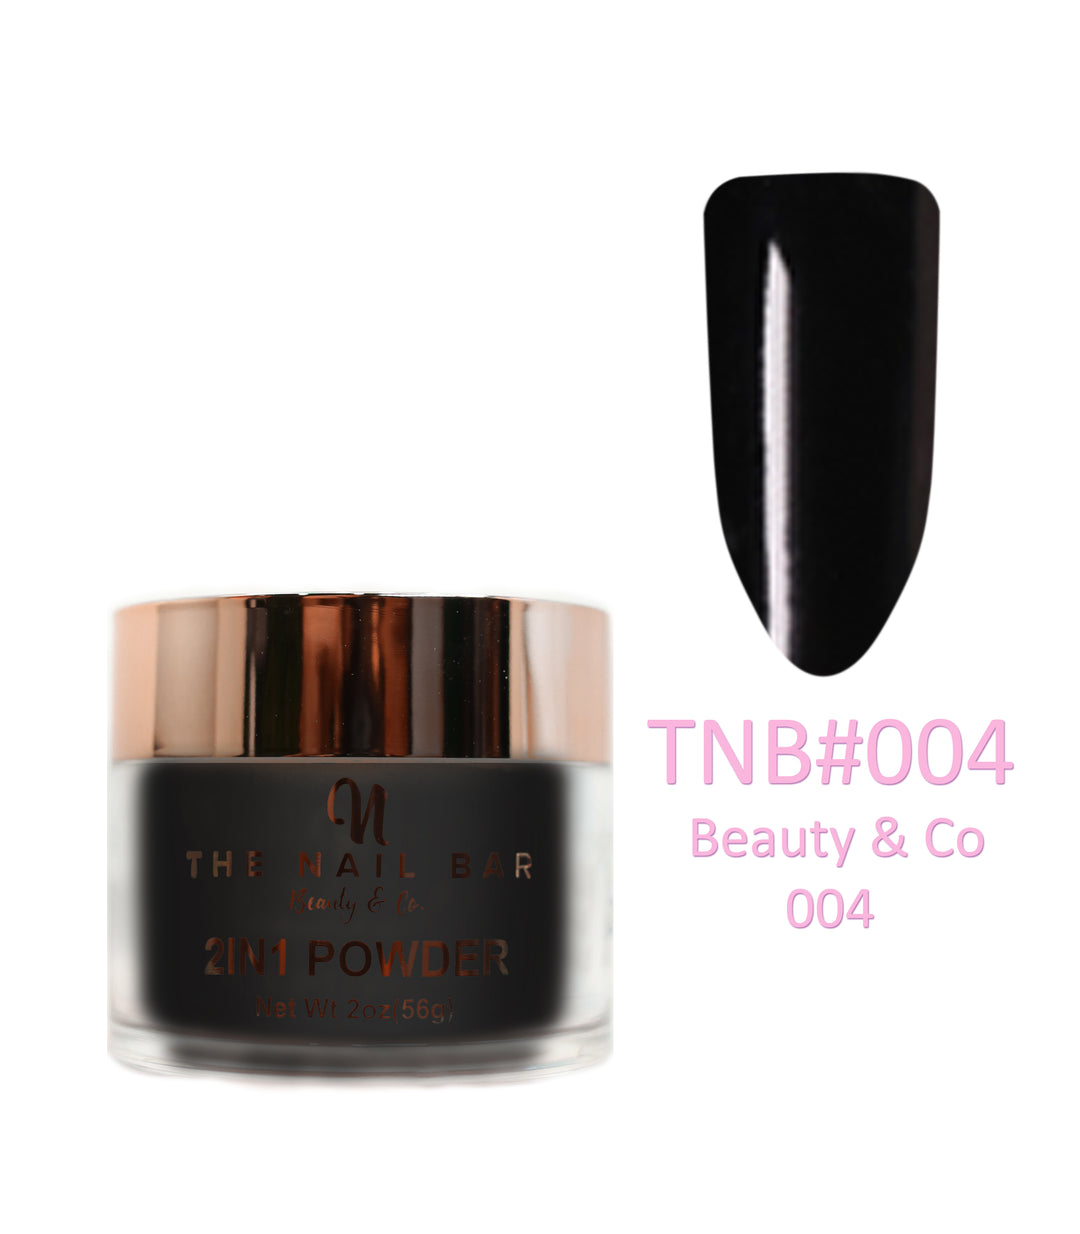 2-In-1 Dipping/Acrylic colour powder (2oz) - Beauty & Co 004 - The Nail Bar Beauty & Co.